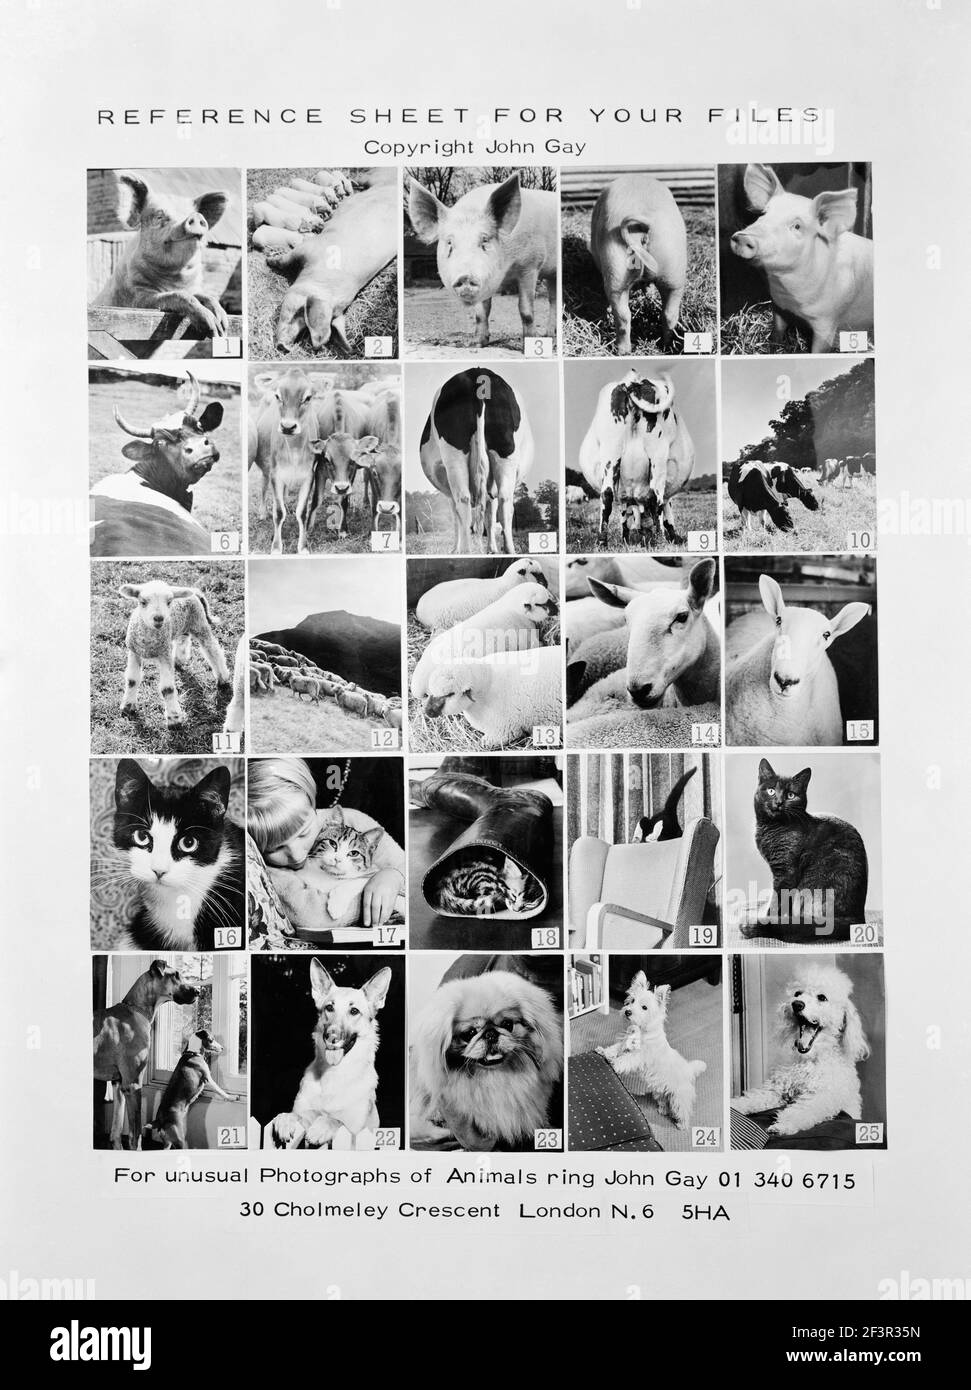 Photograph of promotional reference sheet of unusual photographs of animals taken by John Gay. November 1970. pig, cow, cattle, lamb Stock Photo